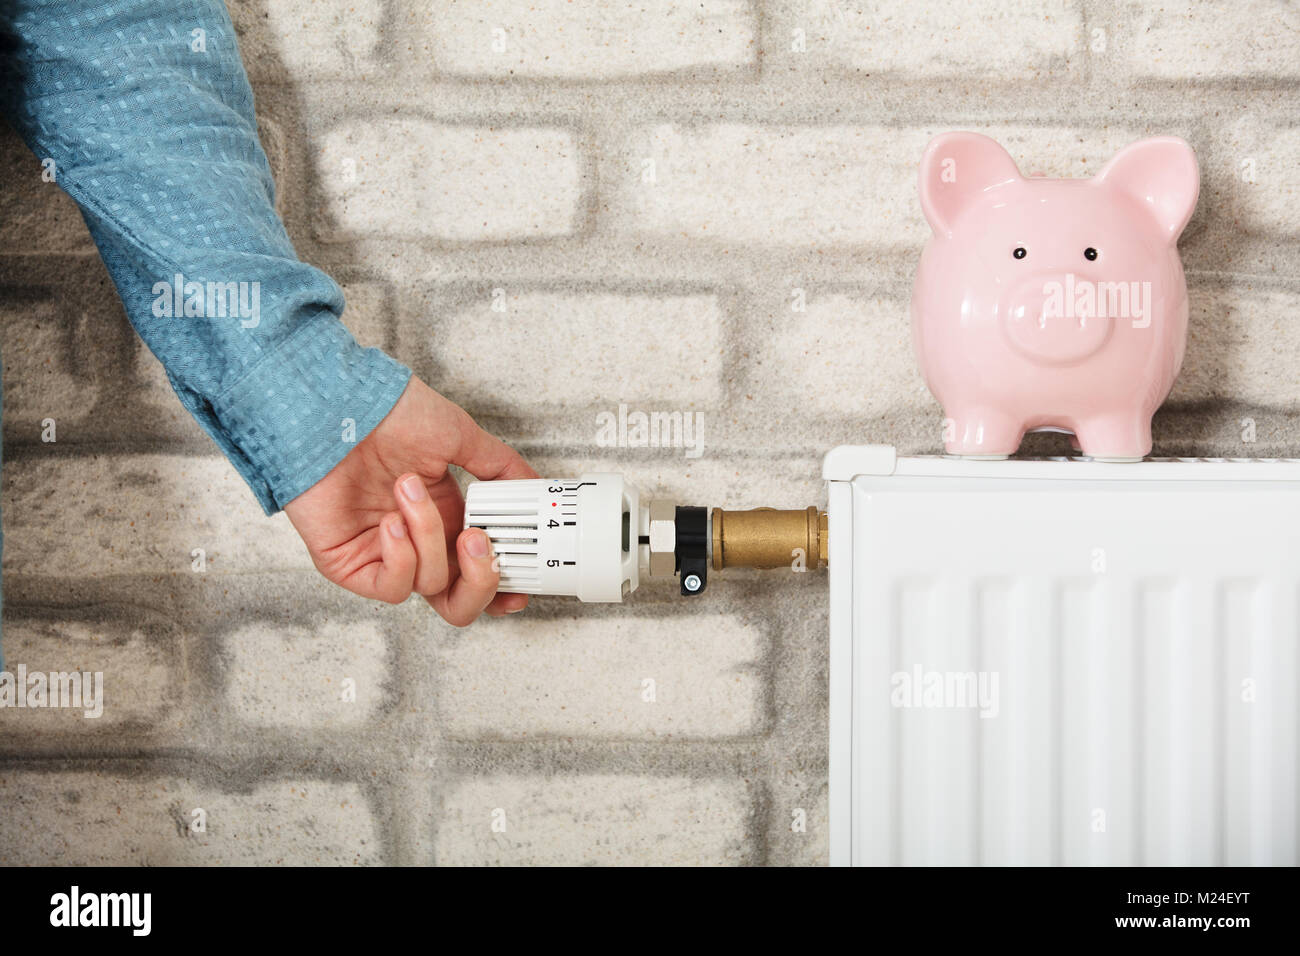 Woman's Hand Adjusting Temperature Of Radiator With Piggy Bank Stock Photo